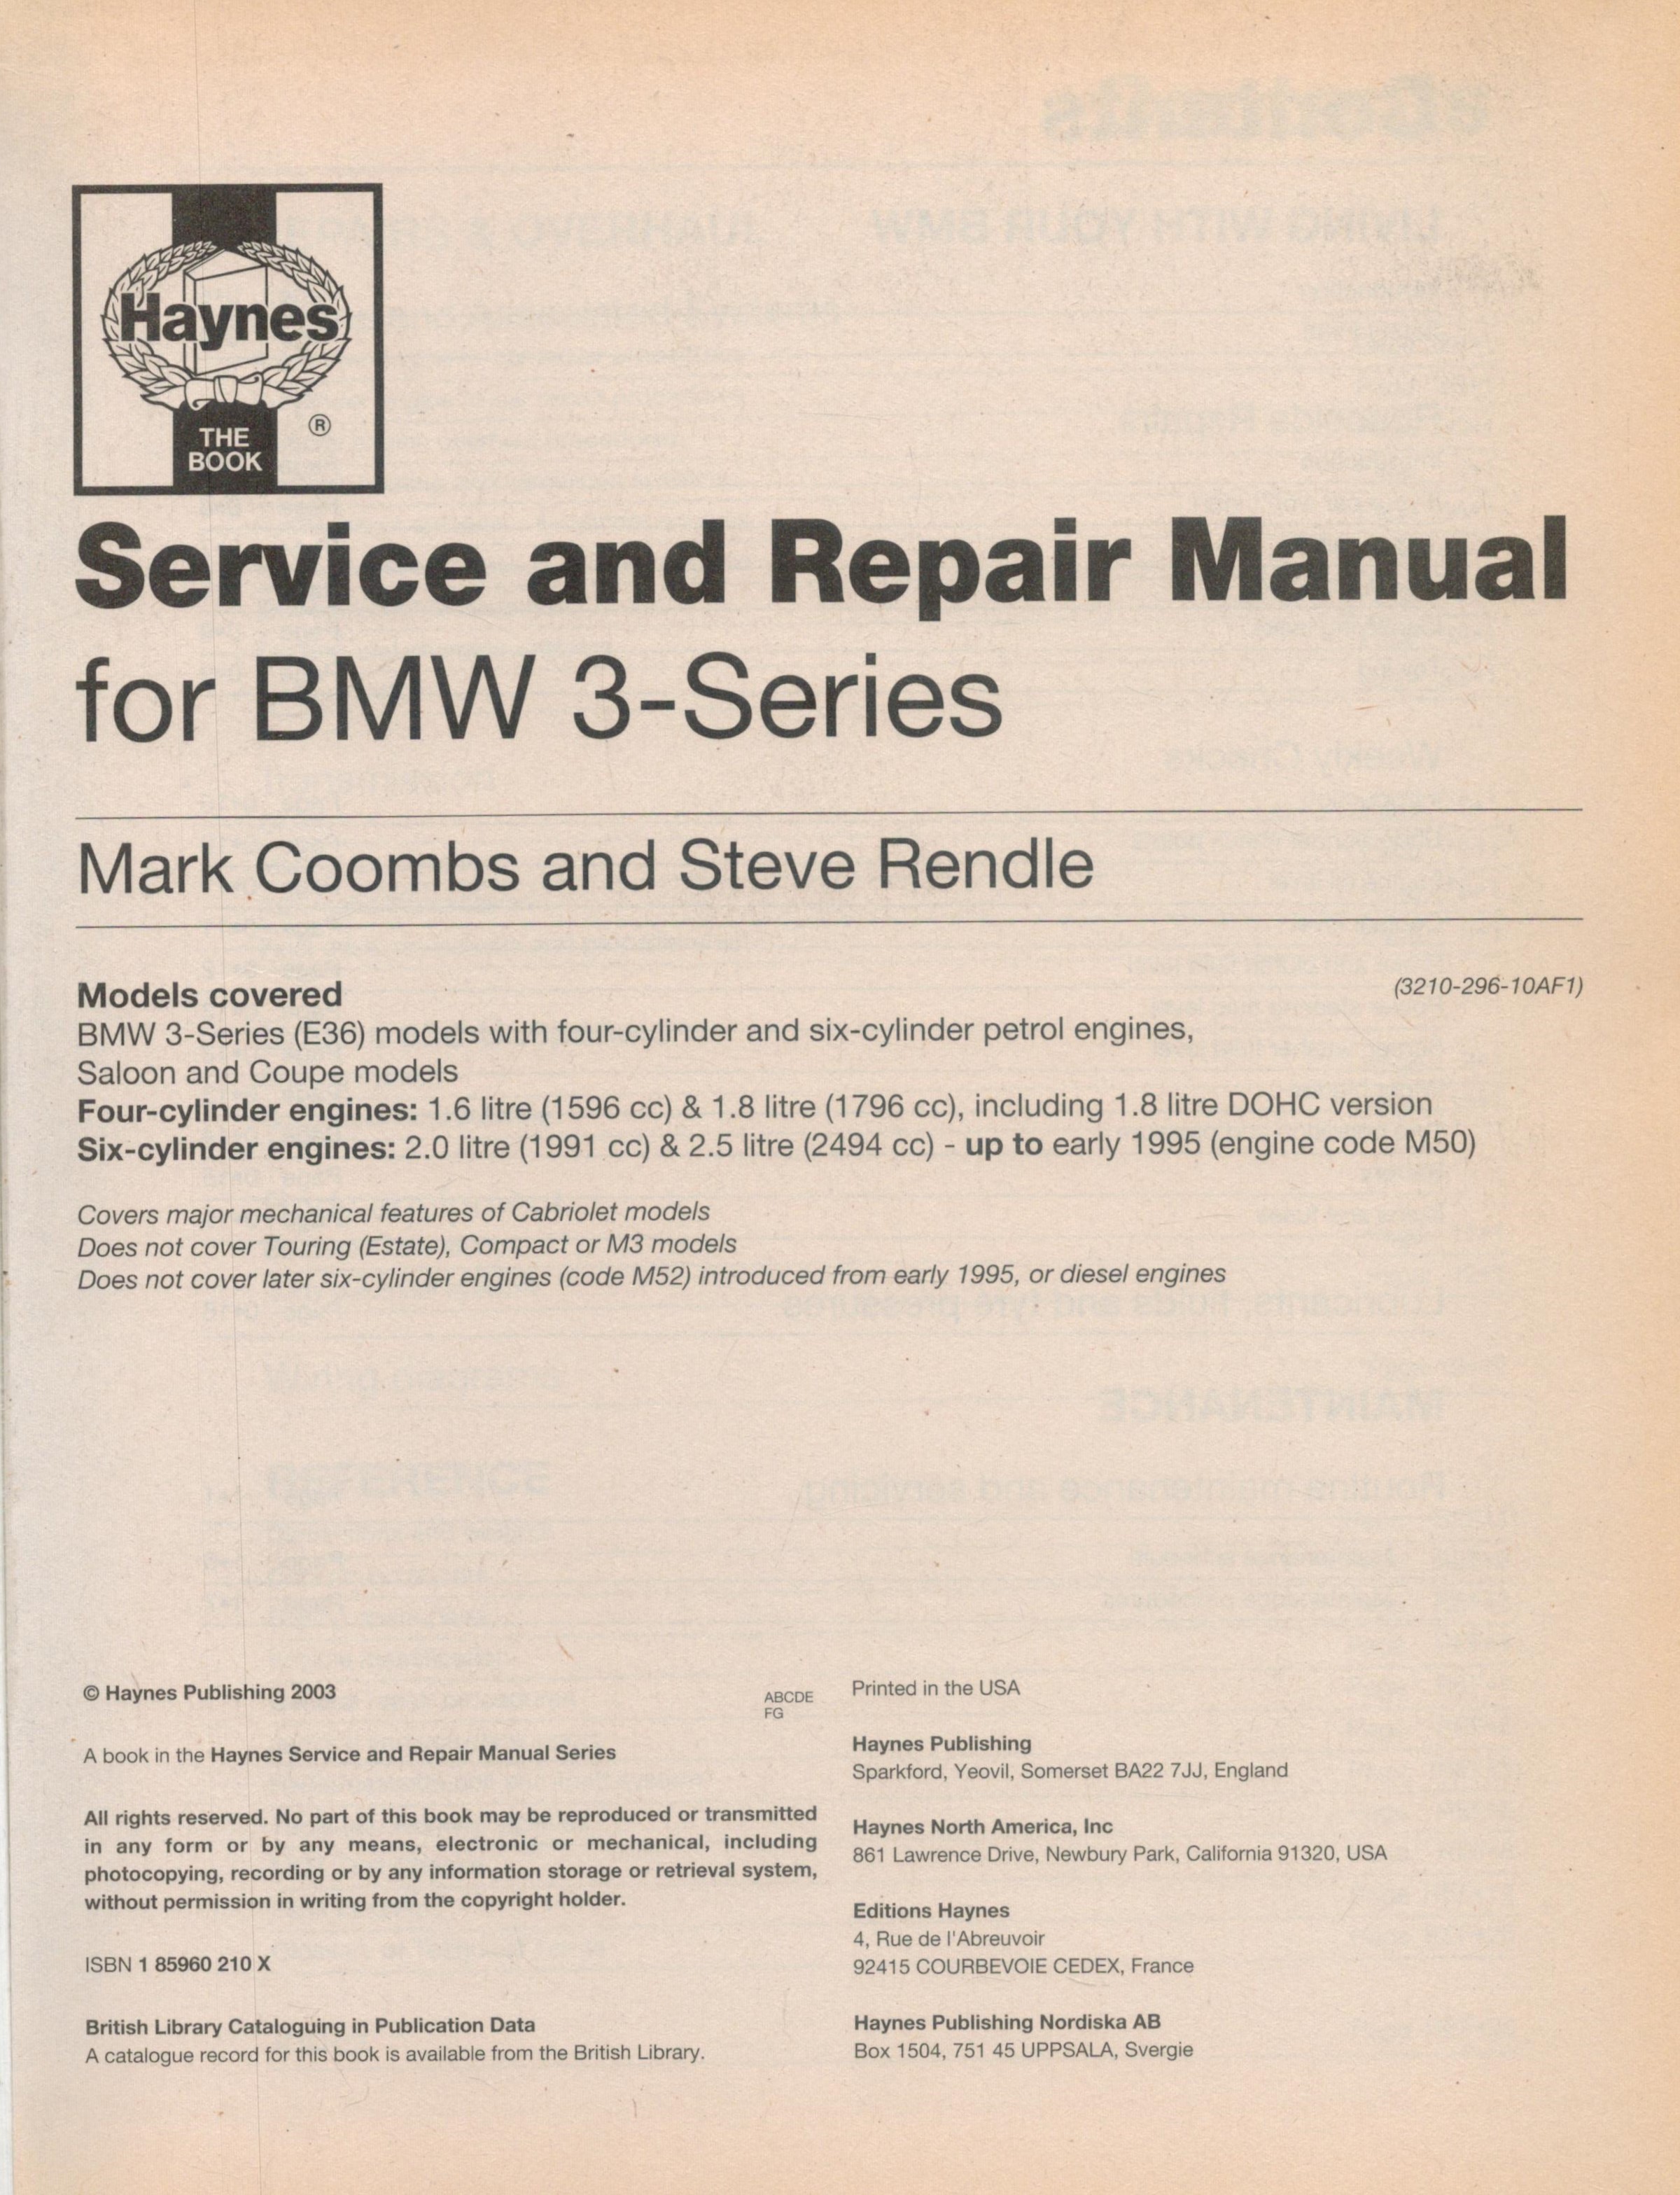 BMW 3-Series Haynes Service and Repair Manual 2003 First Edition Hardback Book published by Haynes - Image 2 of 2